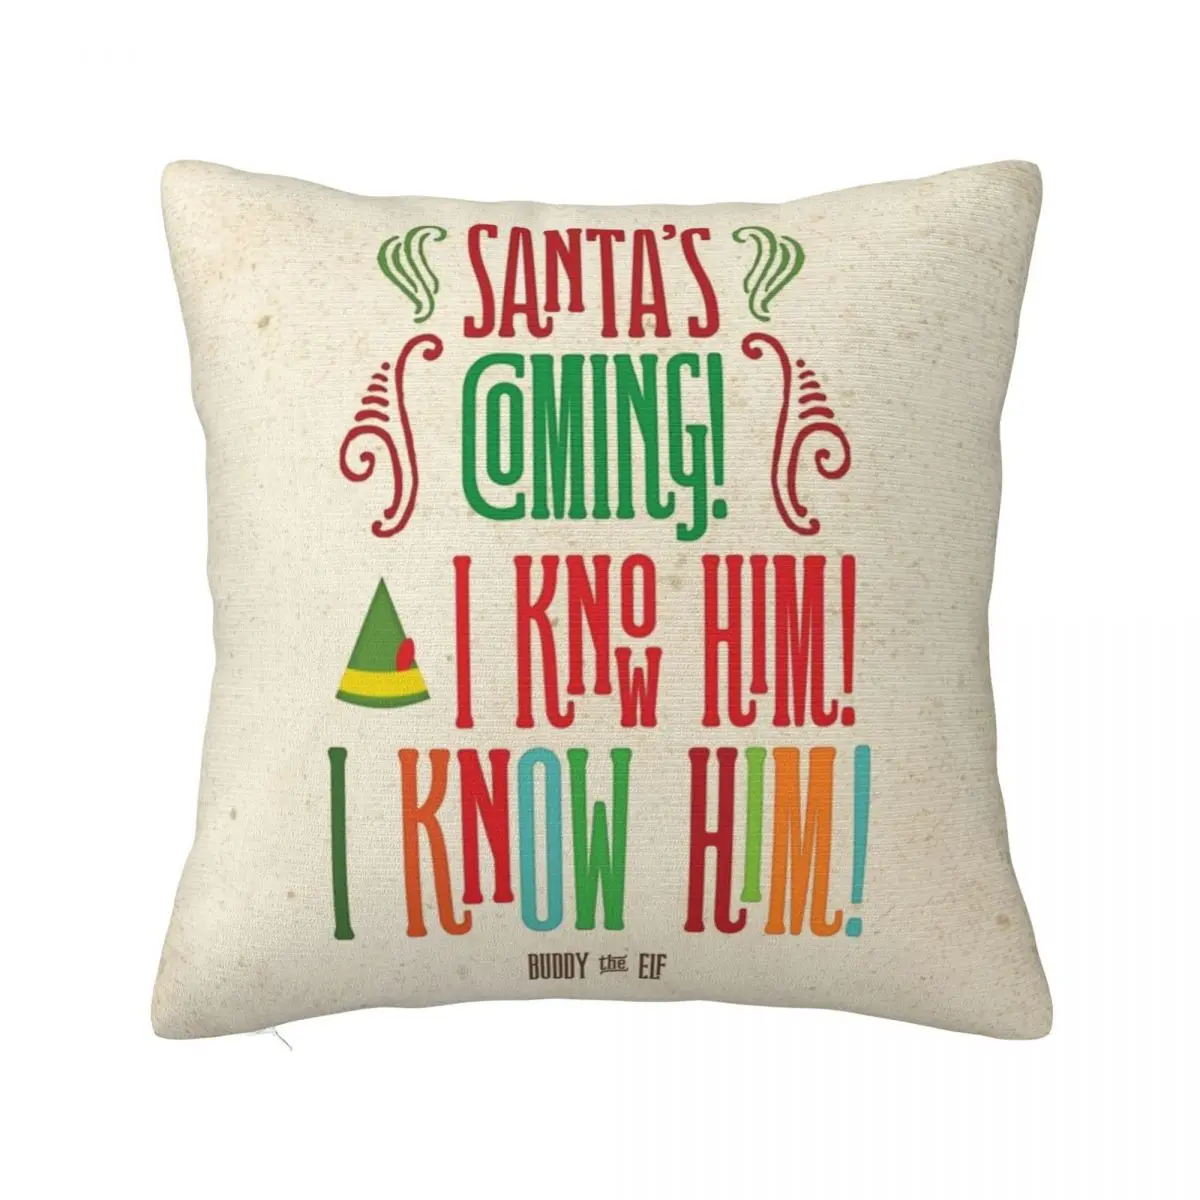 

Buddy the Elf! Santa's Coming! I know him! Throw Pillow Sofa Decorative Covers Pillow Case Christmas